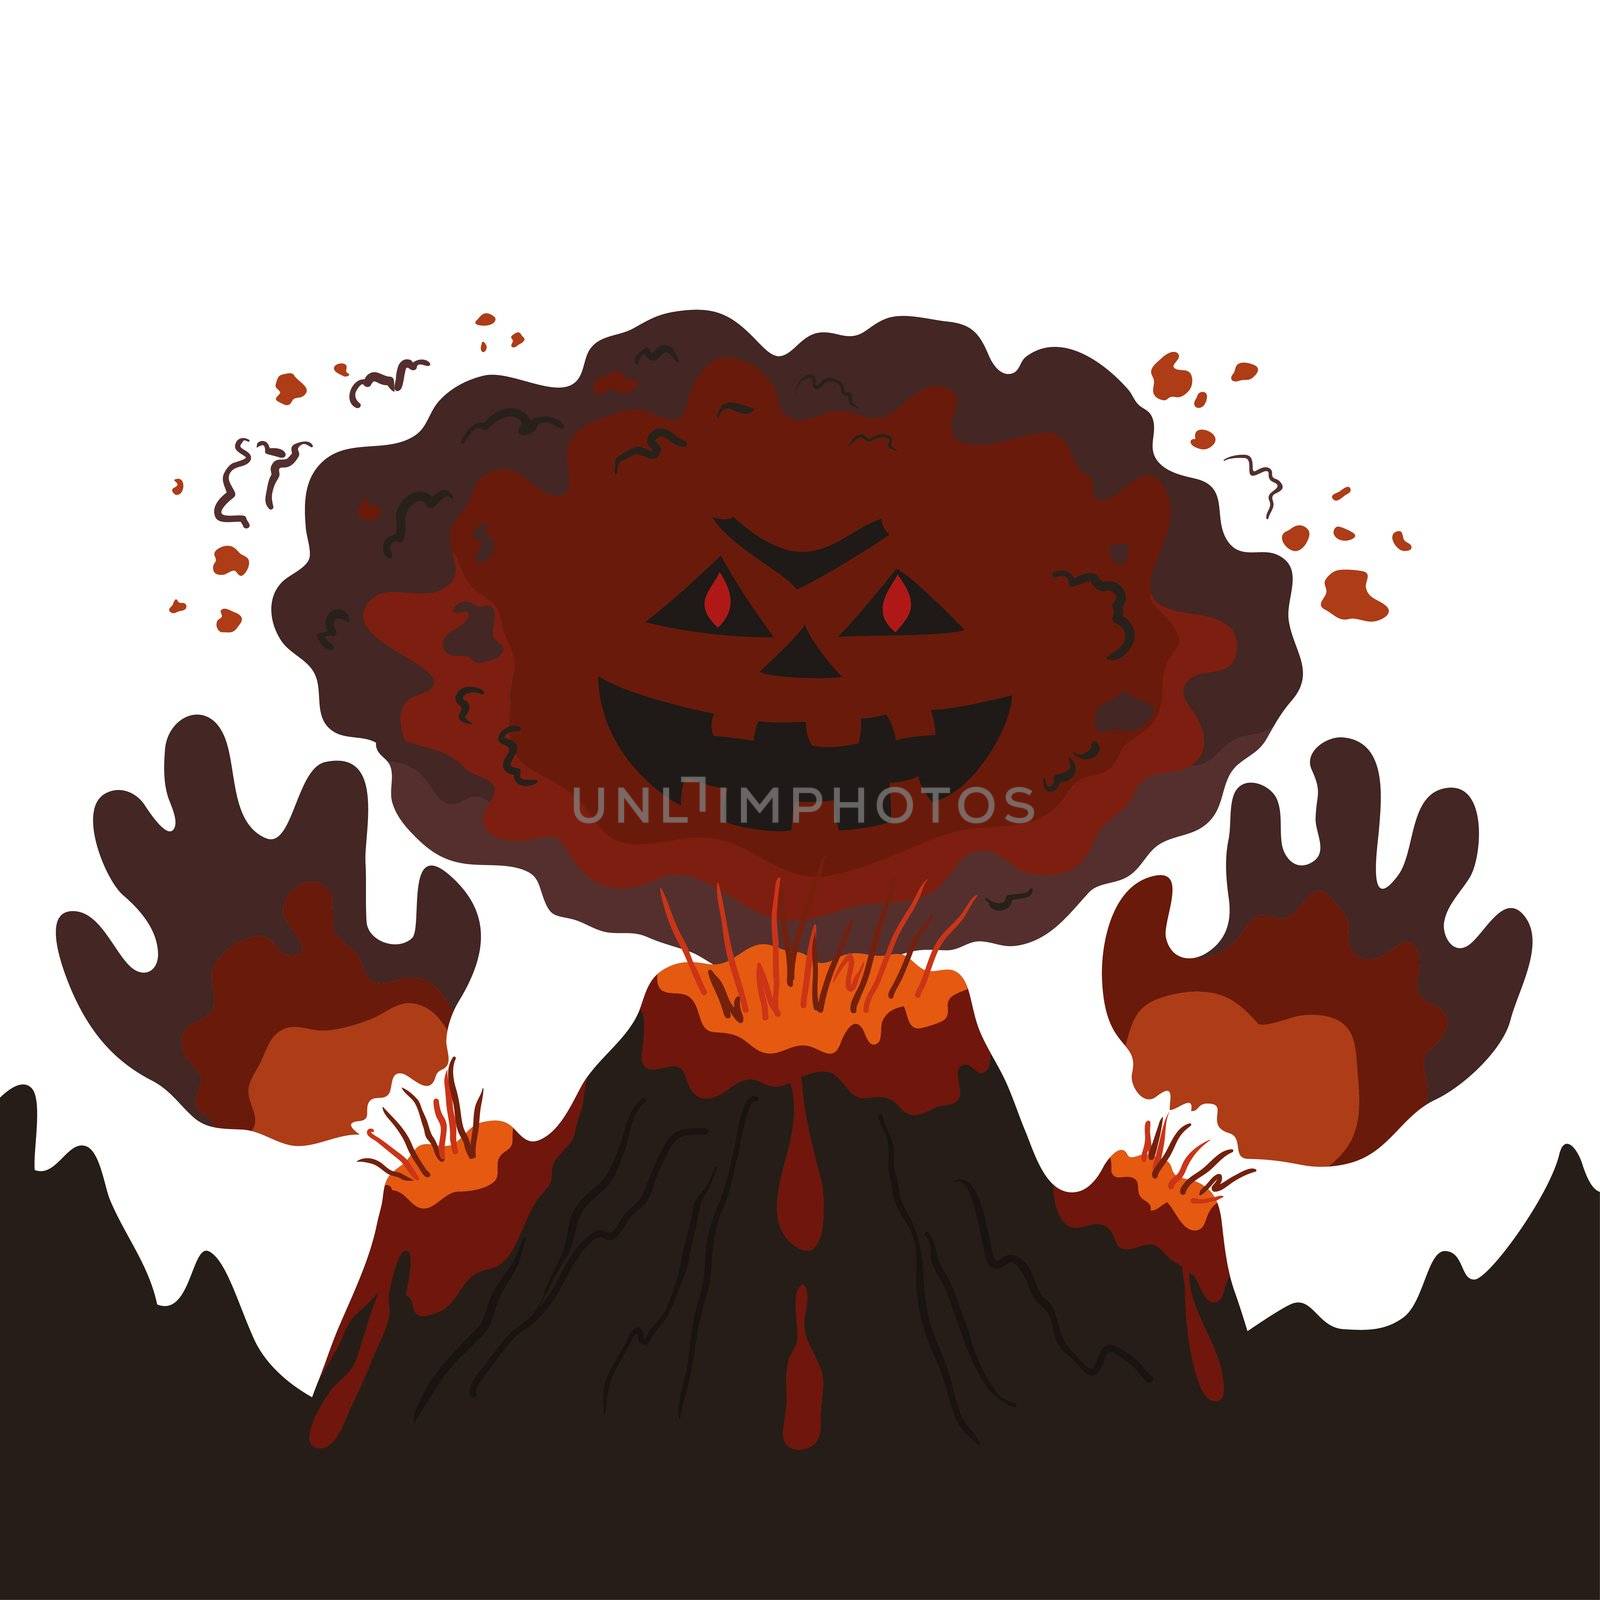 The evil erupting volcano with a human face and hands, cartoon